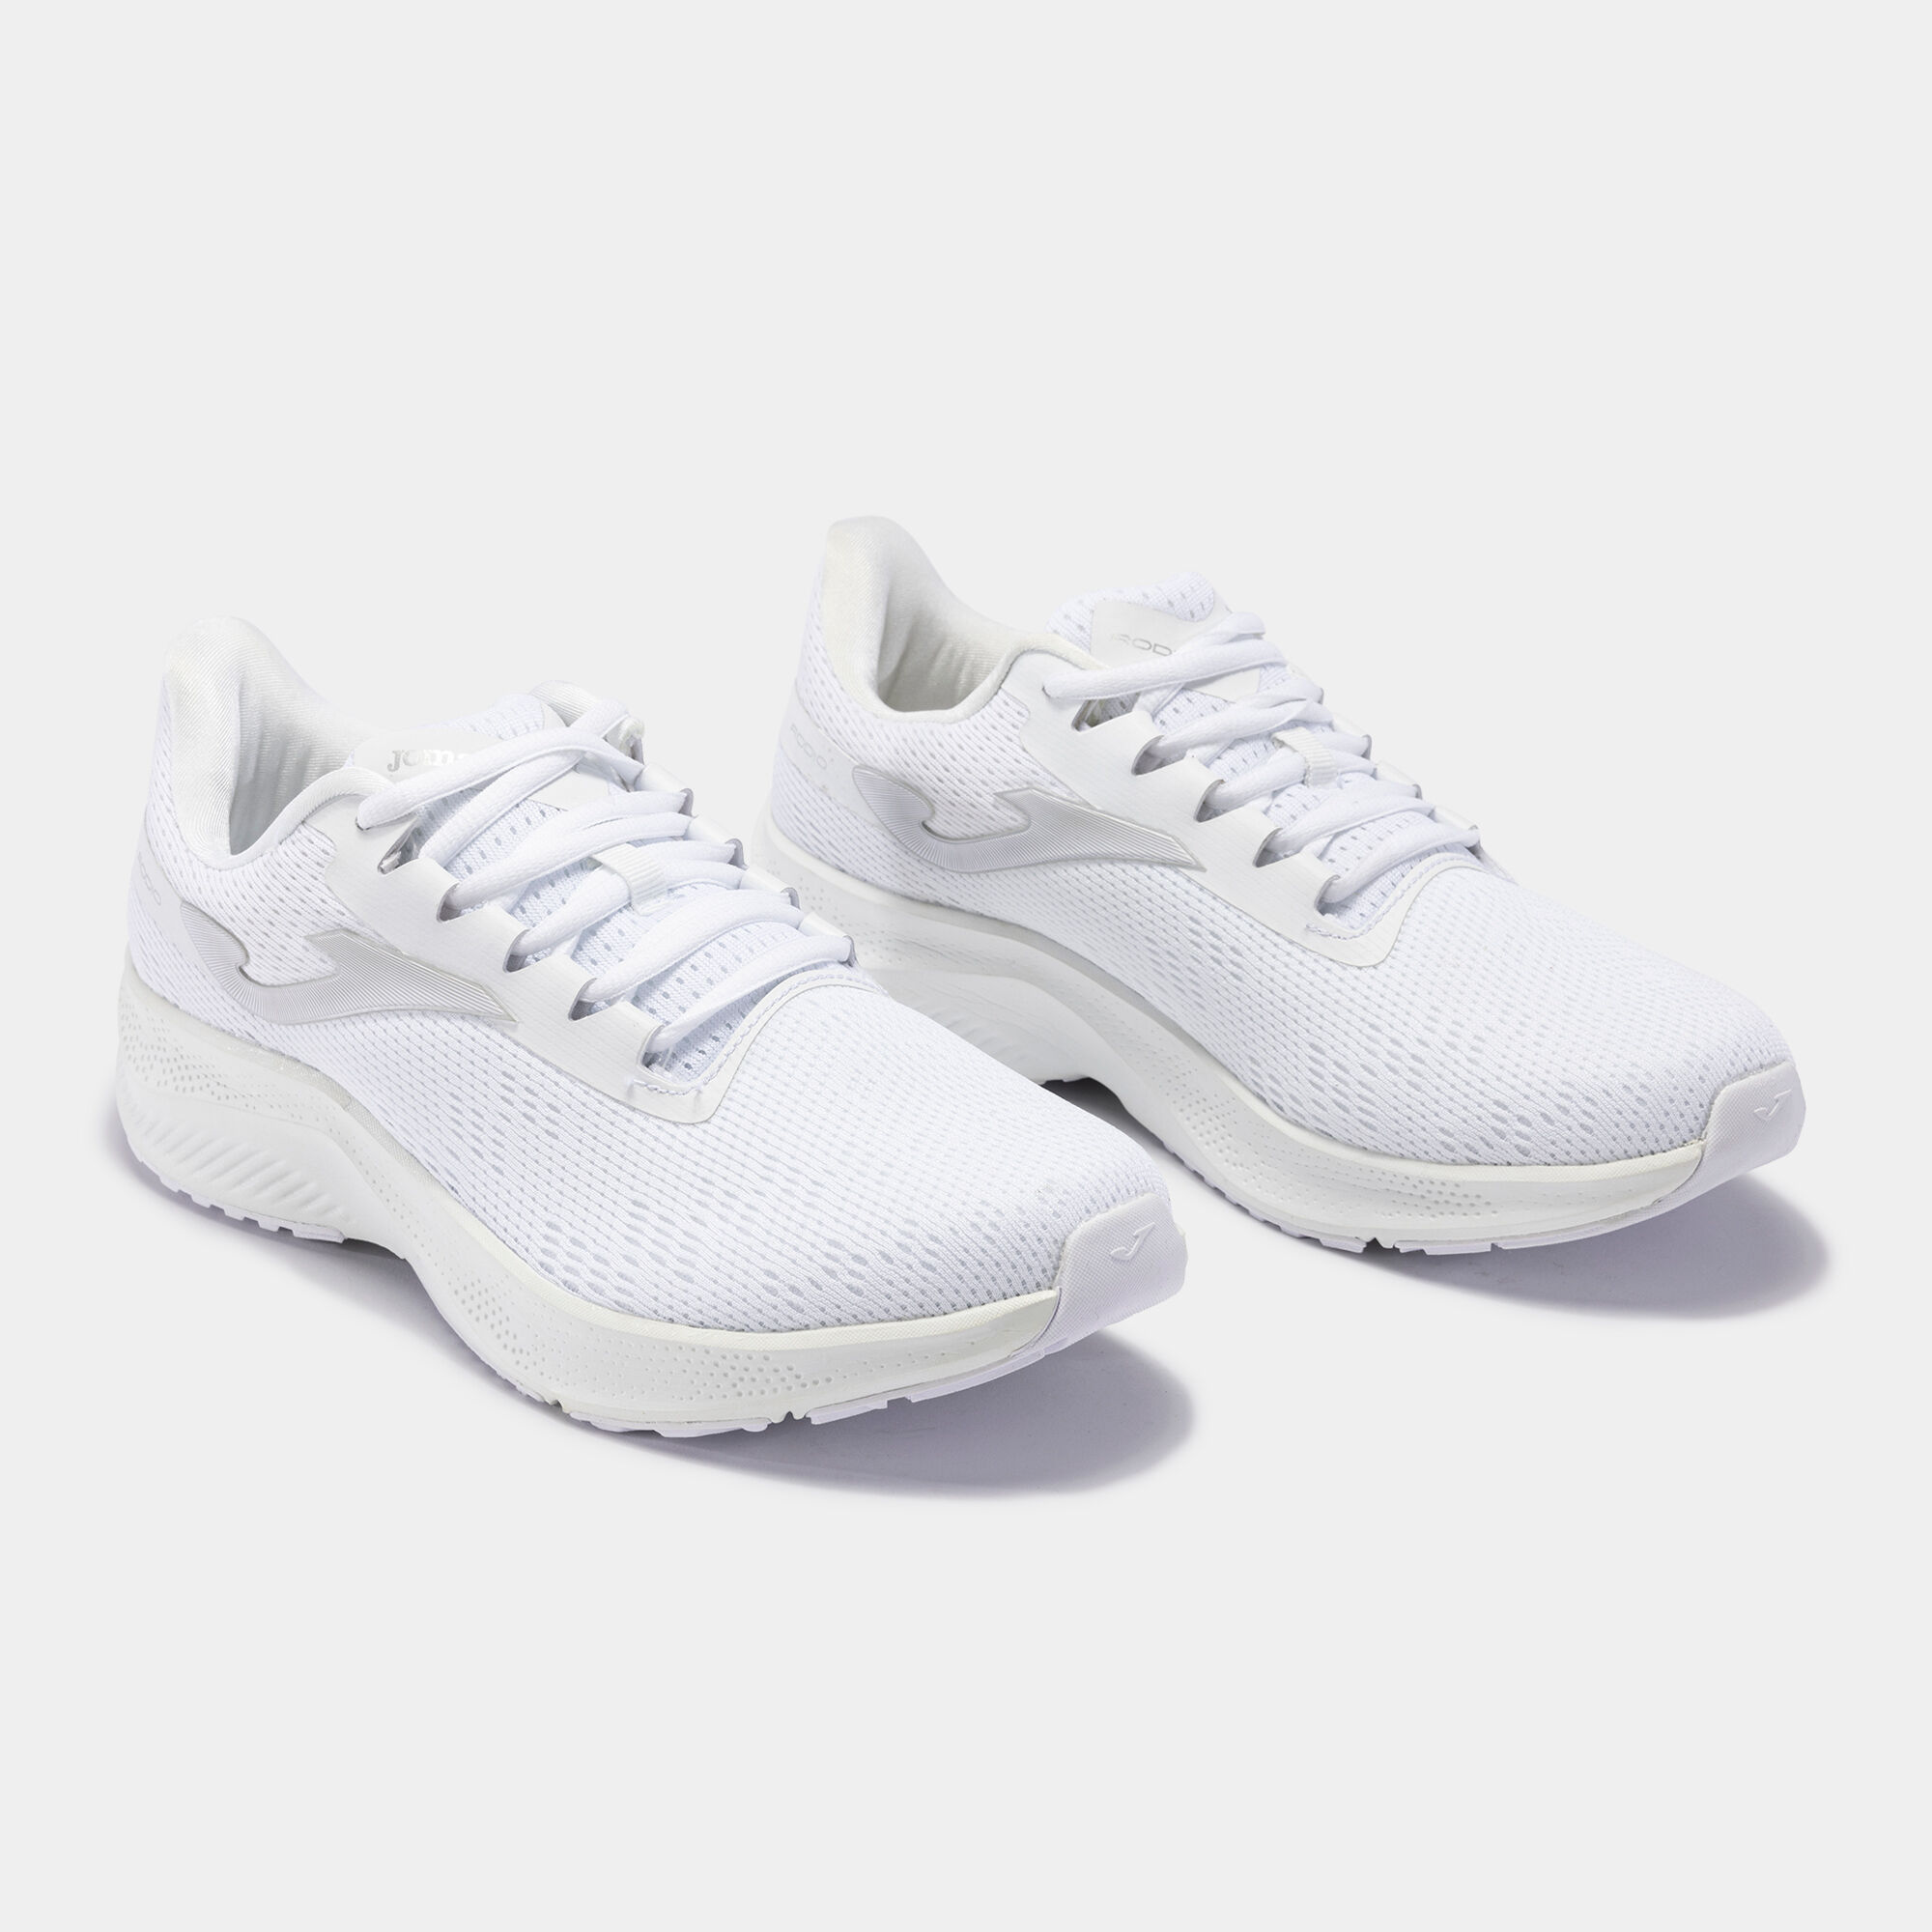 Running shoes Rodio 22 woman white